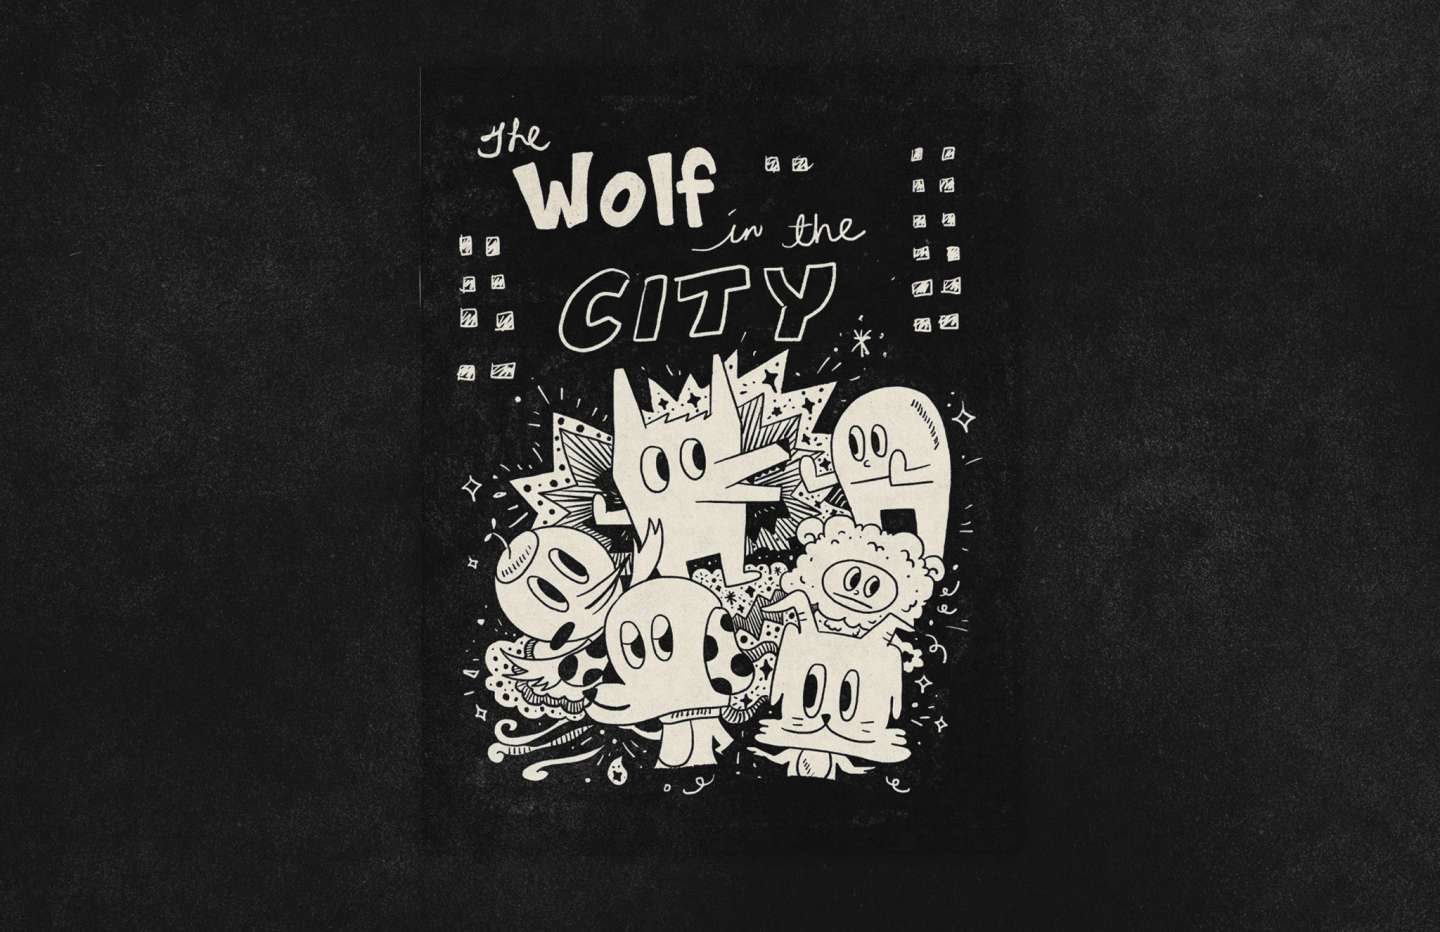 The Wolf in the City